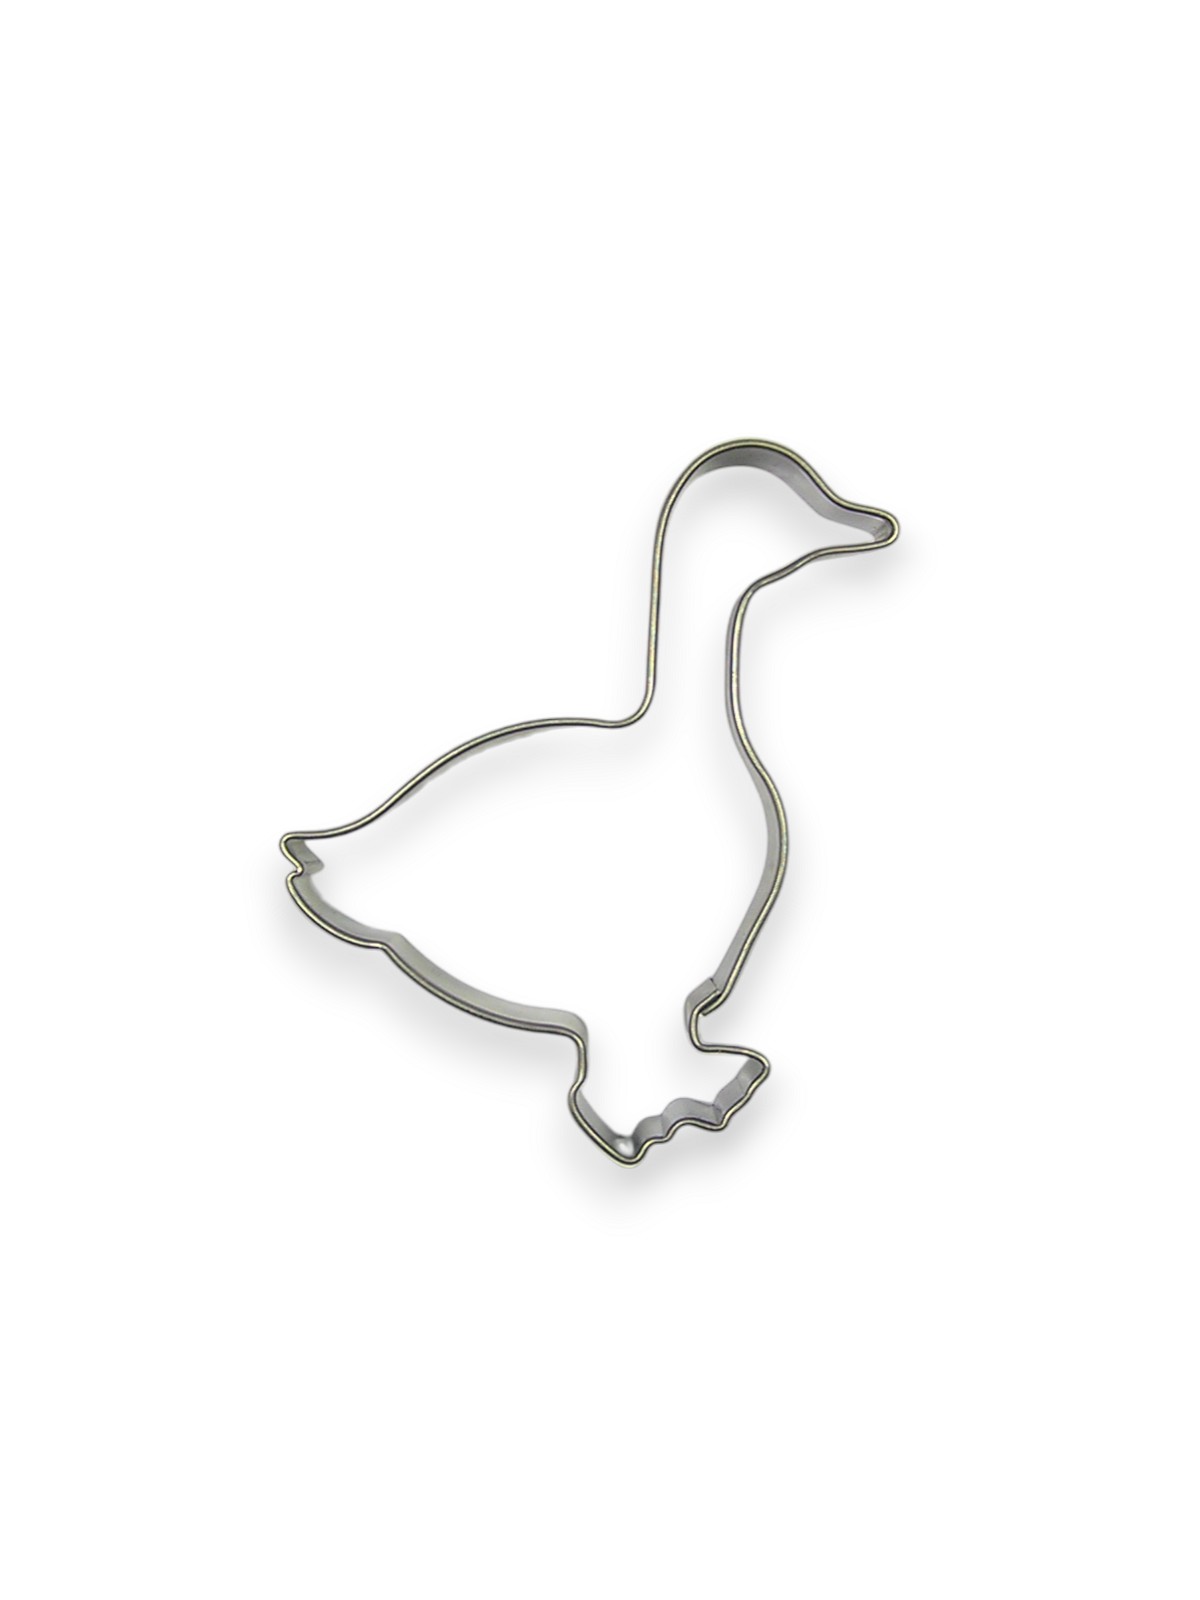 Stainless steel cutter - goose